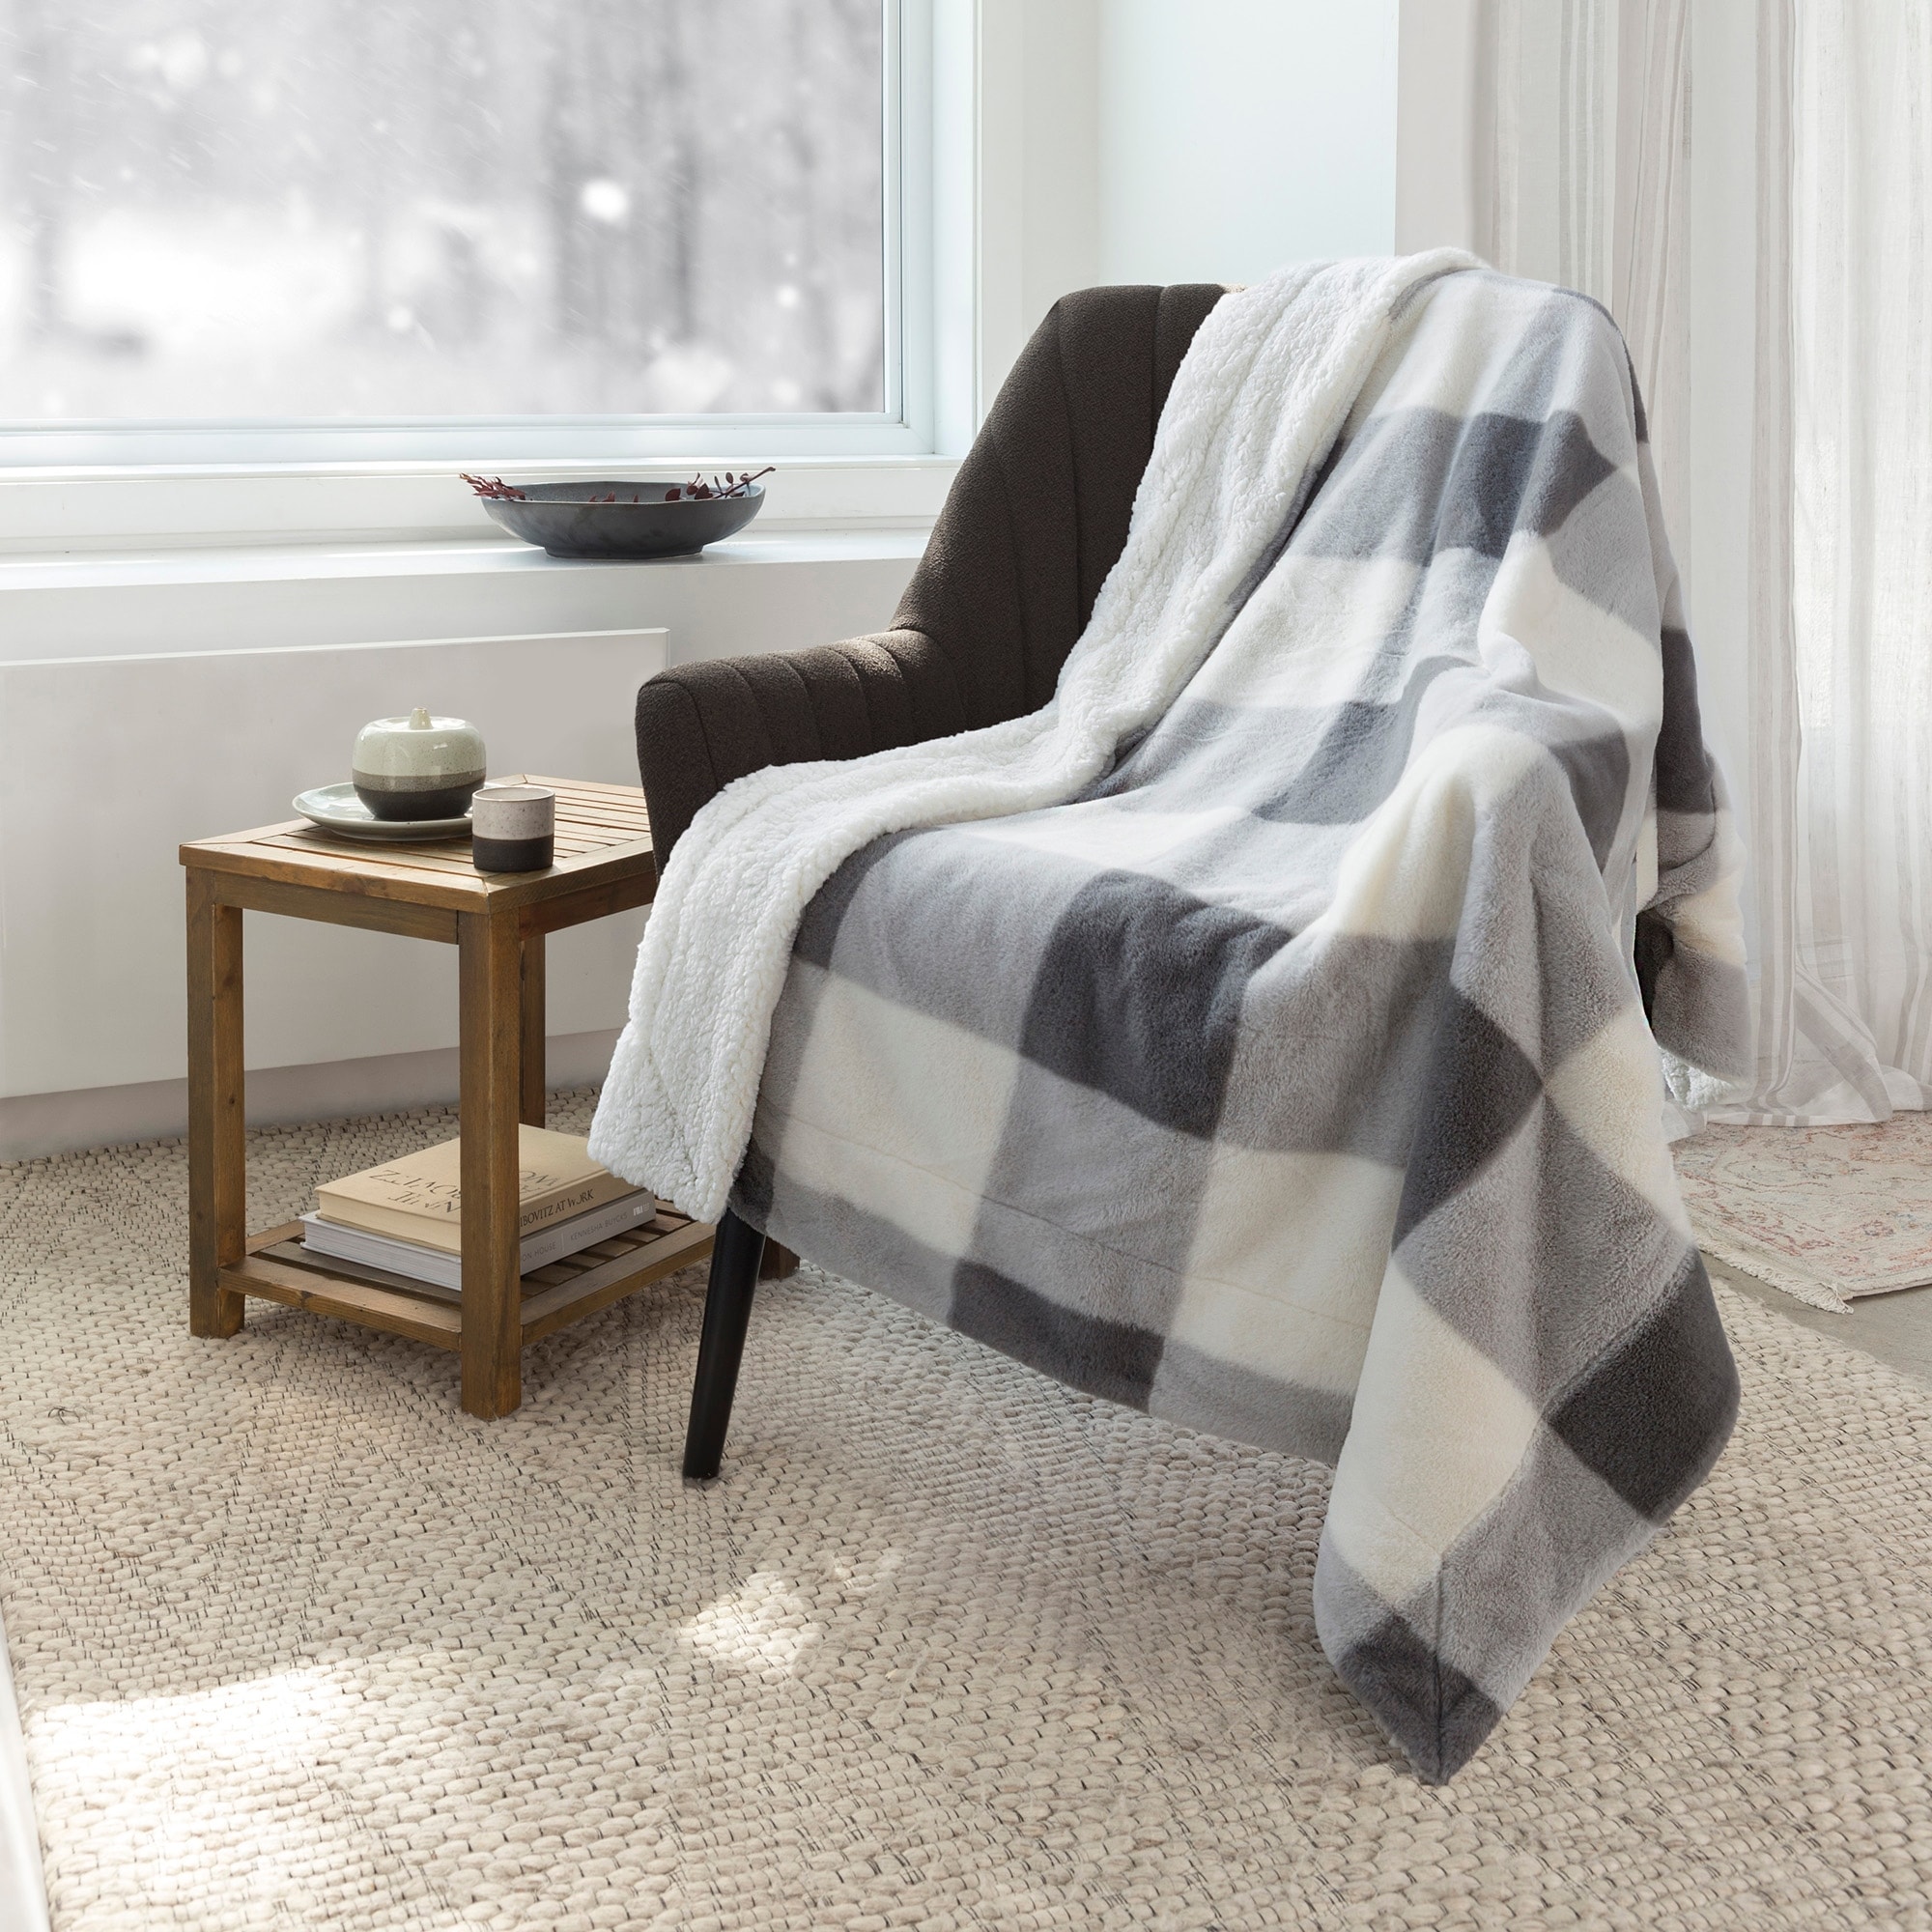 https://ak1.ostkcdn.com/images/products/is/images/direct/3d48ae70f12e230da74ae3fe1b0e69b334fe259d/Premium-Reversible-Throw-Blanket-60in-x-48in-%28Grey-Buffalo-Plaid%29.jpg